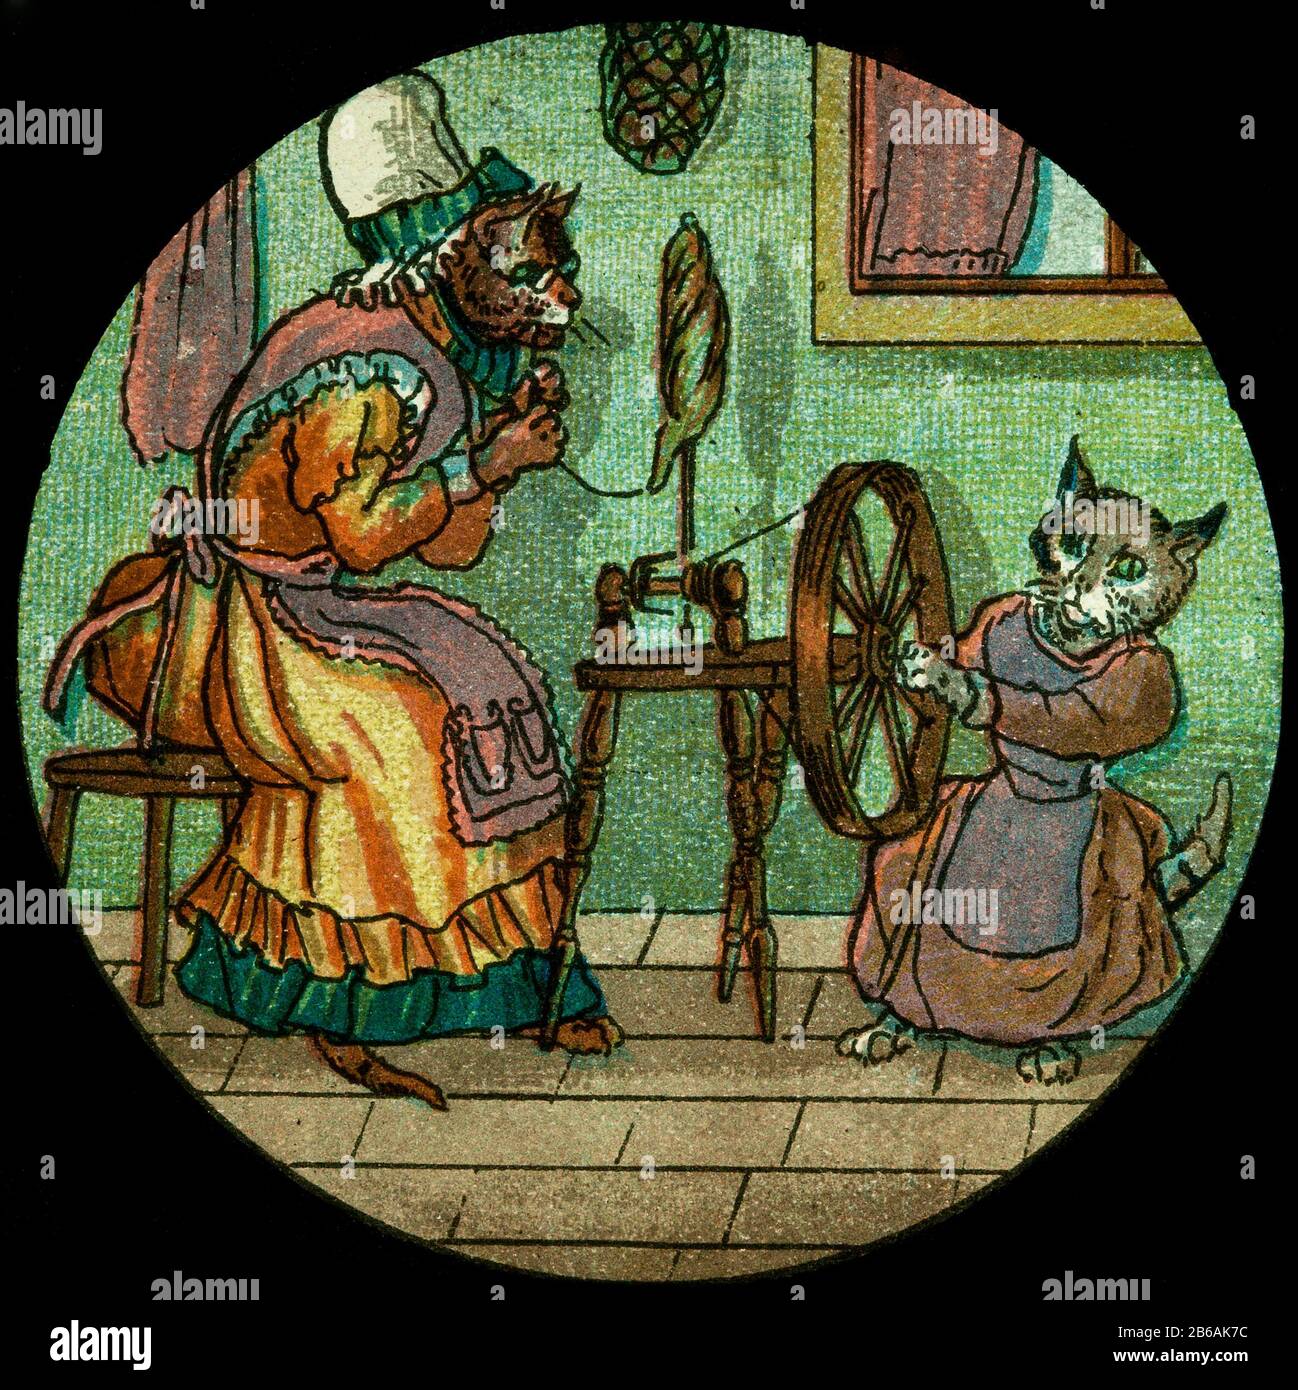 colour illustrations of Magic Lantern Slide circa 1900.  The stories of cat and dog pantomimes, catch a tiger by the tail, crow and Goose animated figures Stock Photo